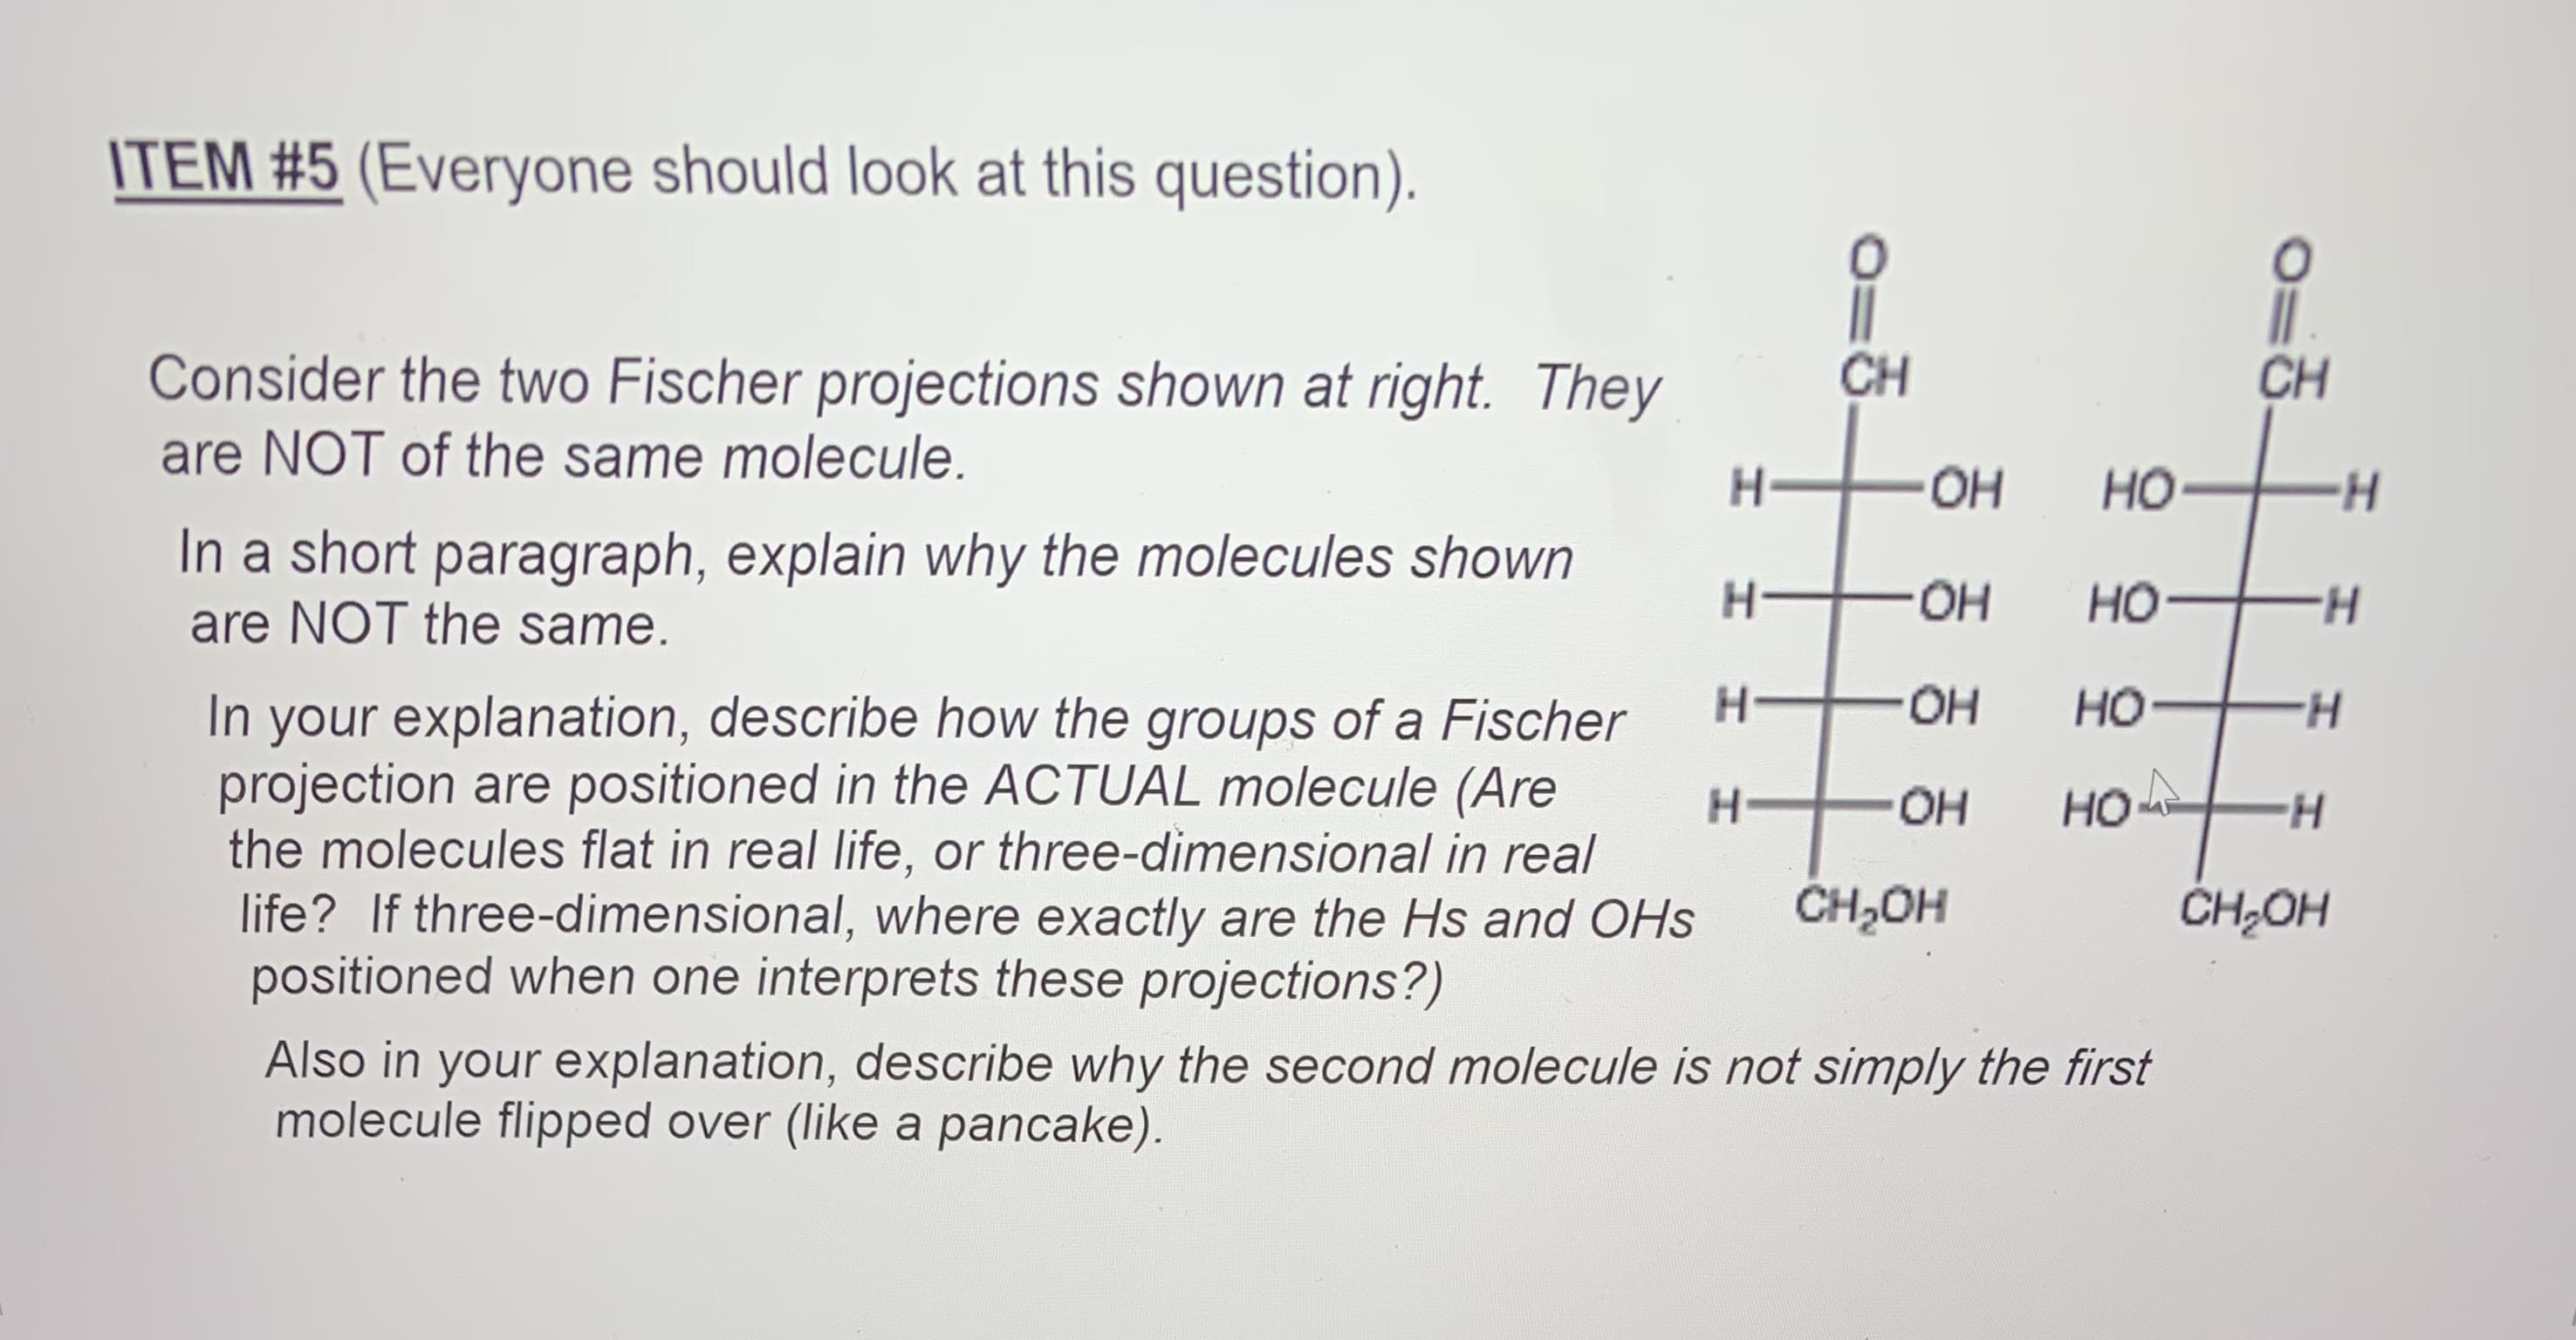 ITEM #5 (Everyone should look at this question).
Consider the two Fischer projections shown at right. They
CH
CH
are NOT of the same molecule.
H-
-HO-
HO
In a short paragraph, explain why the molecules shown
are NOT the same.
OH
но-
H.
HO.
но
In your explanation, describe how the groups of a Fischer
projection are positioned in the ACTUAL molecule (Are
the molecules flat in real life, or three-dimensional in real
life? If three-dimensional, where exactly are the Hs and OHs
positioned when one interprets these projections?)
H-
HO
но
H-
CH,OH
ČH;OH
Also in your explanation, describe why the second molecule is not simply the first
molecule flipped over (like a pancake).
